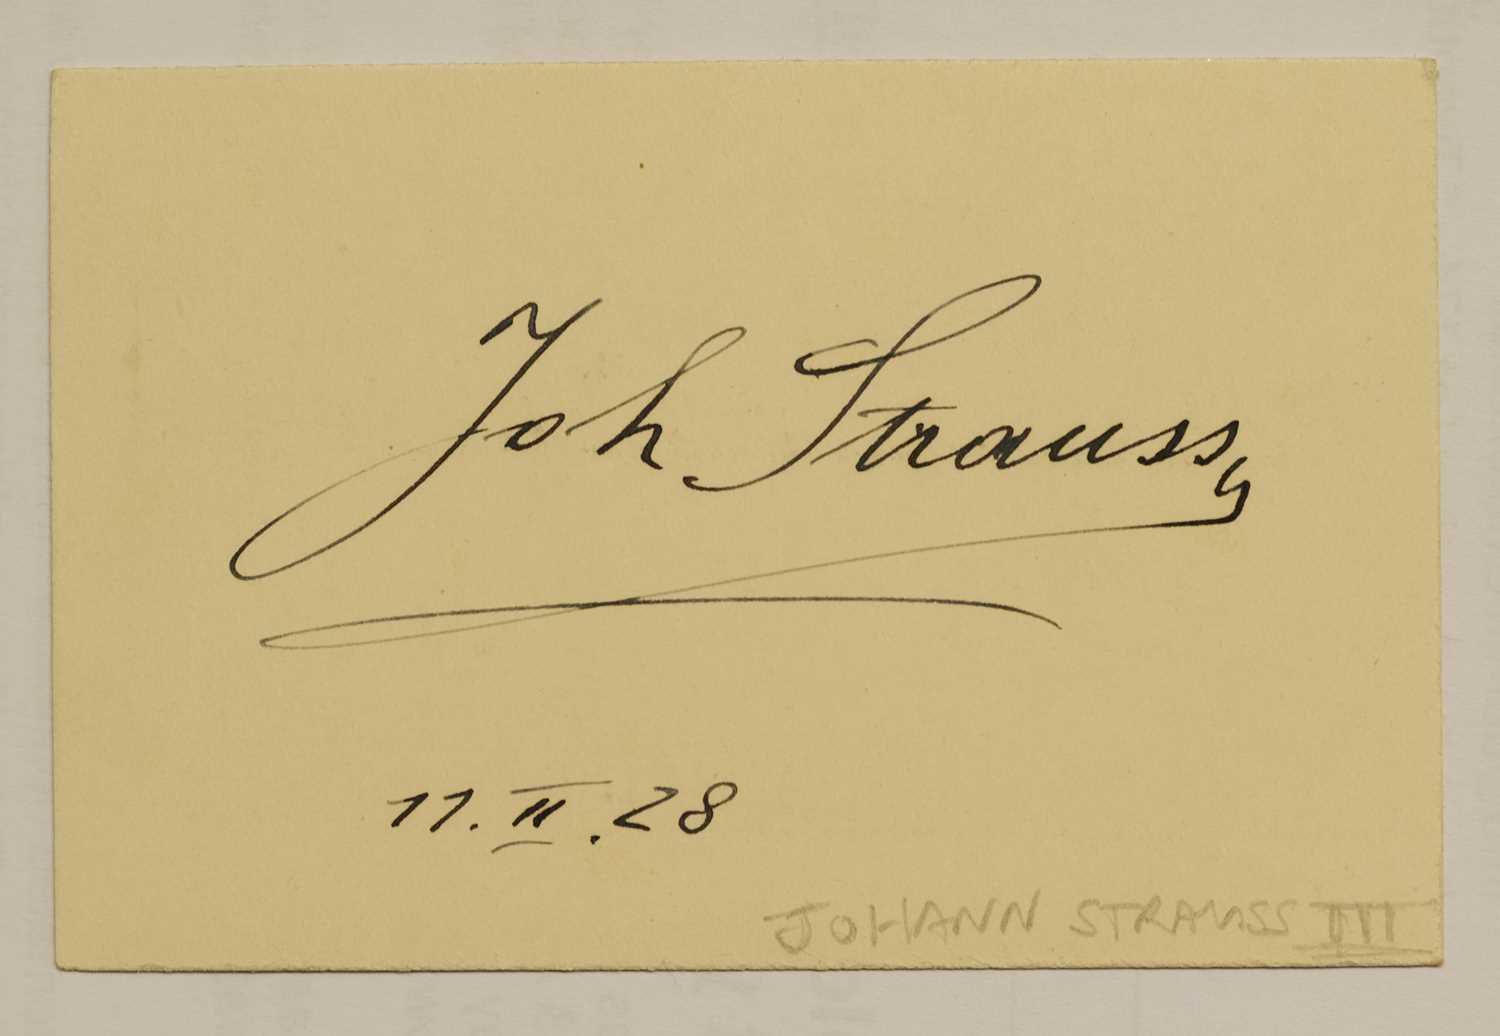 Lot 174 - Twentieth-Century Autographs. A collection of approx. 200 autographs on card, circa 1920s/1950s